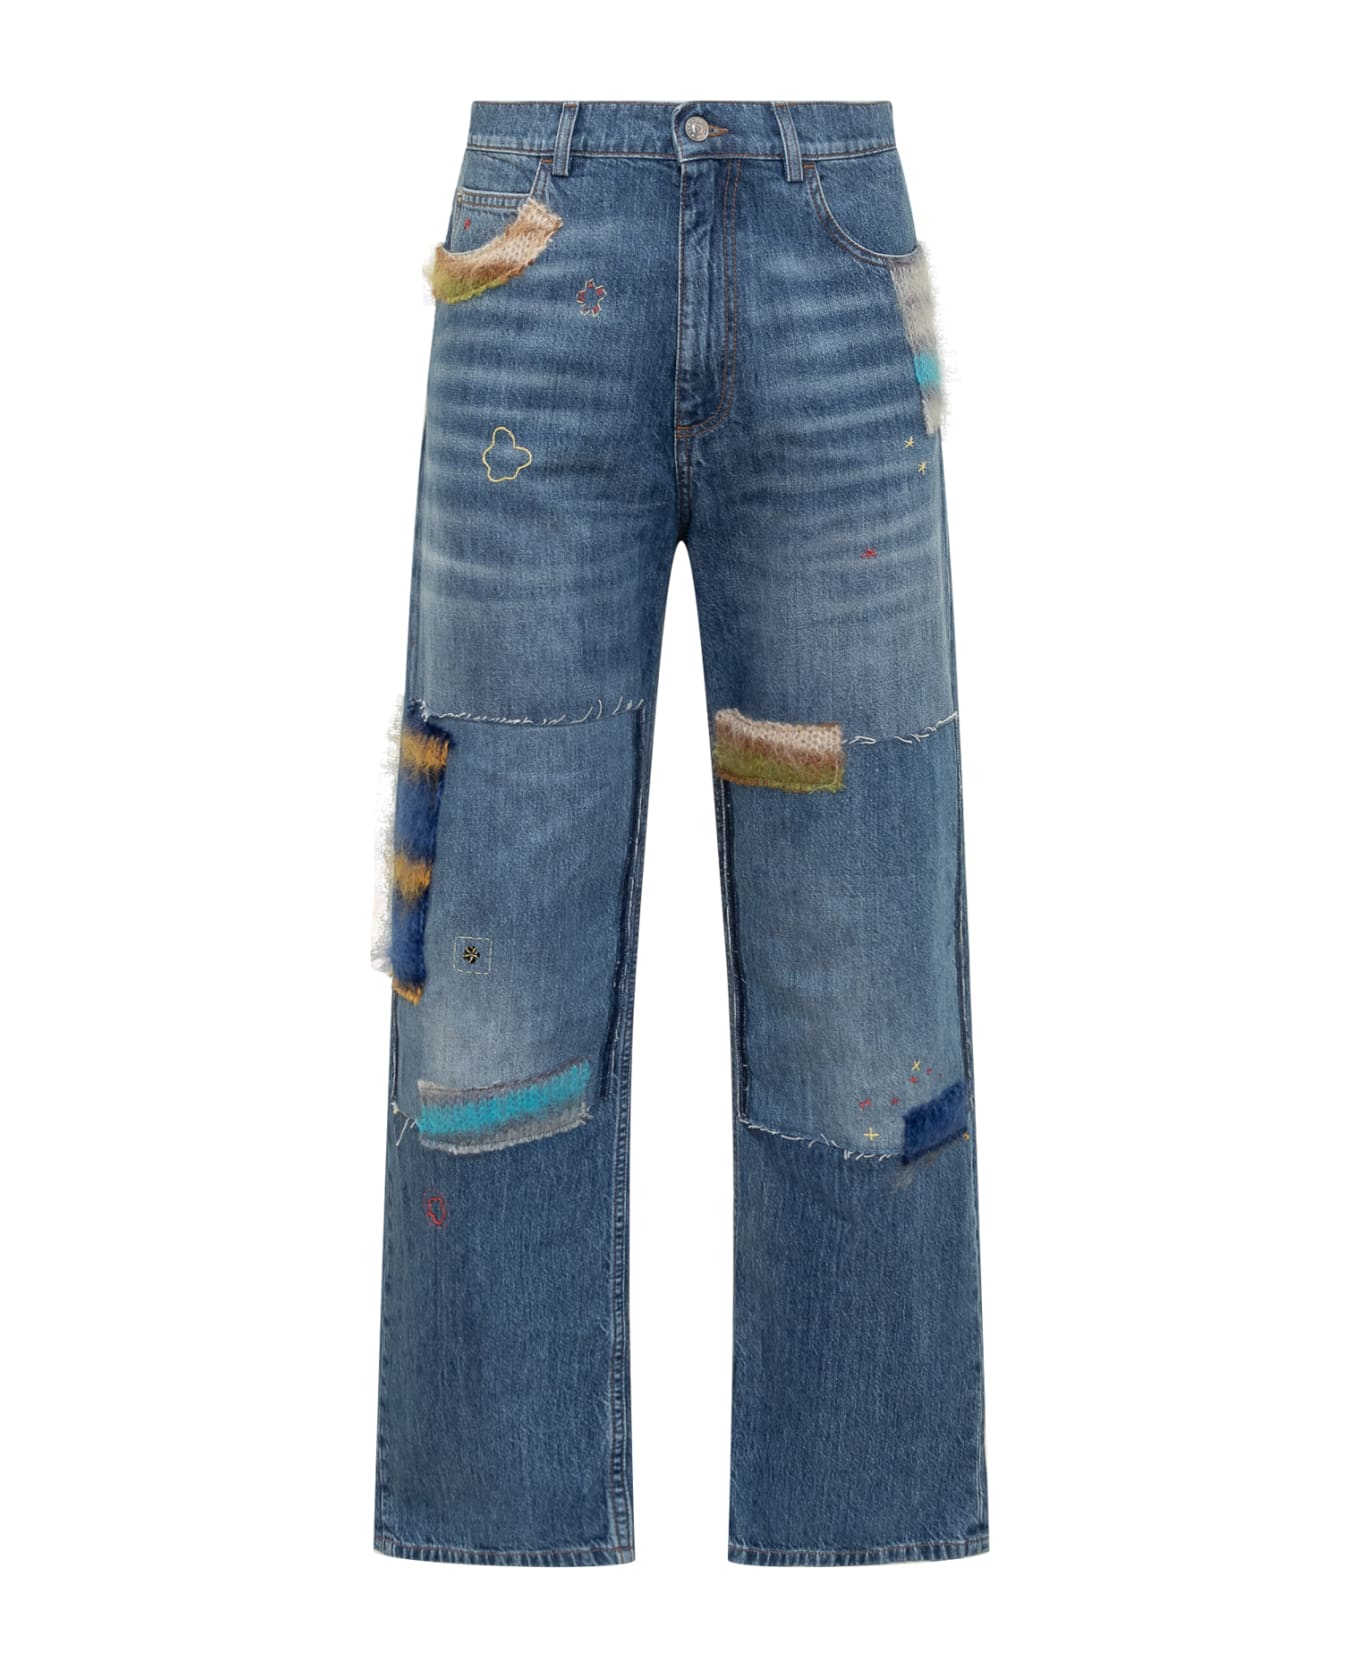 Marni Jeans With Patches - IRIS BLUE デニム